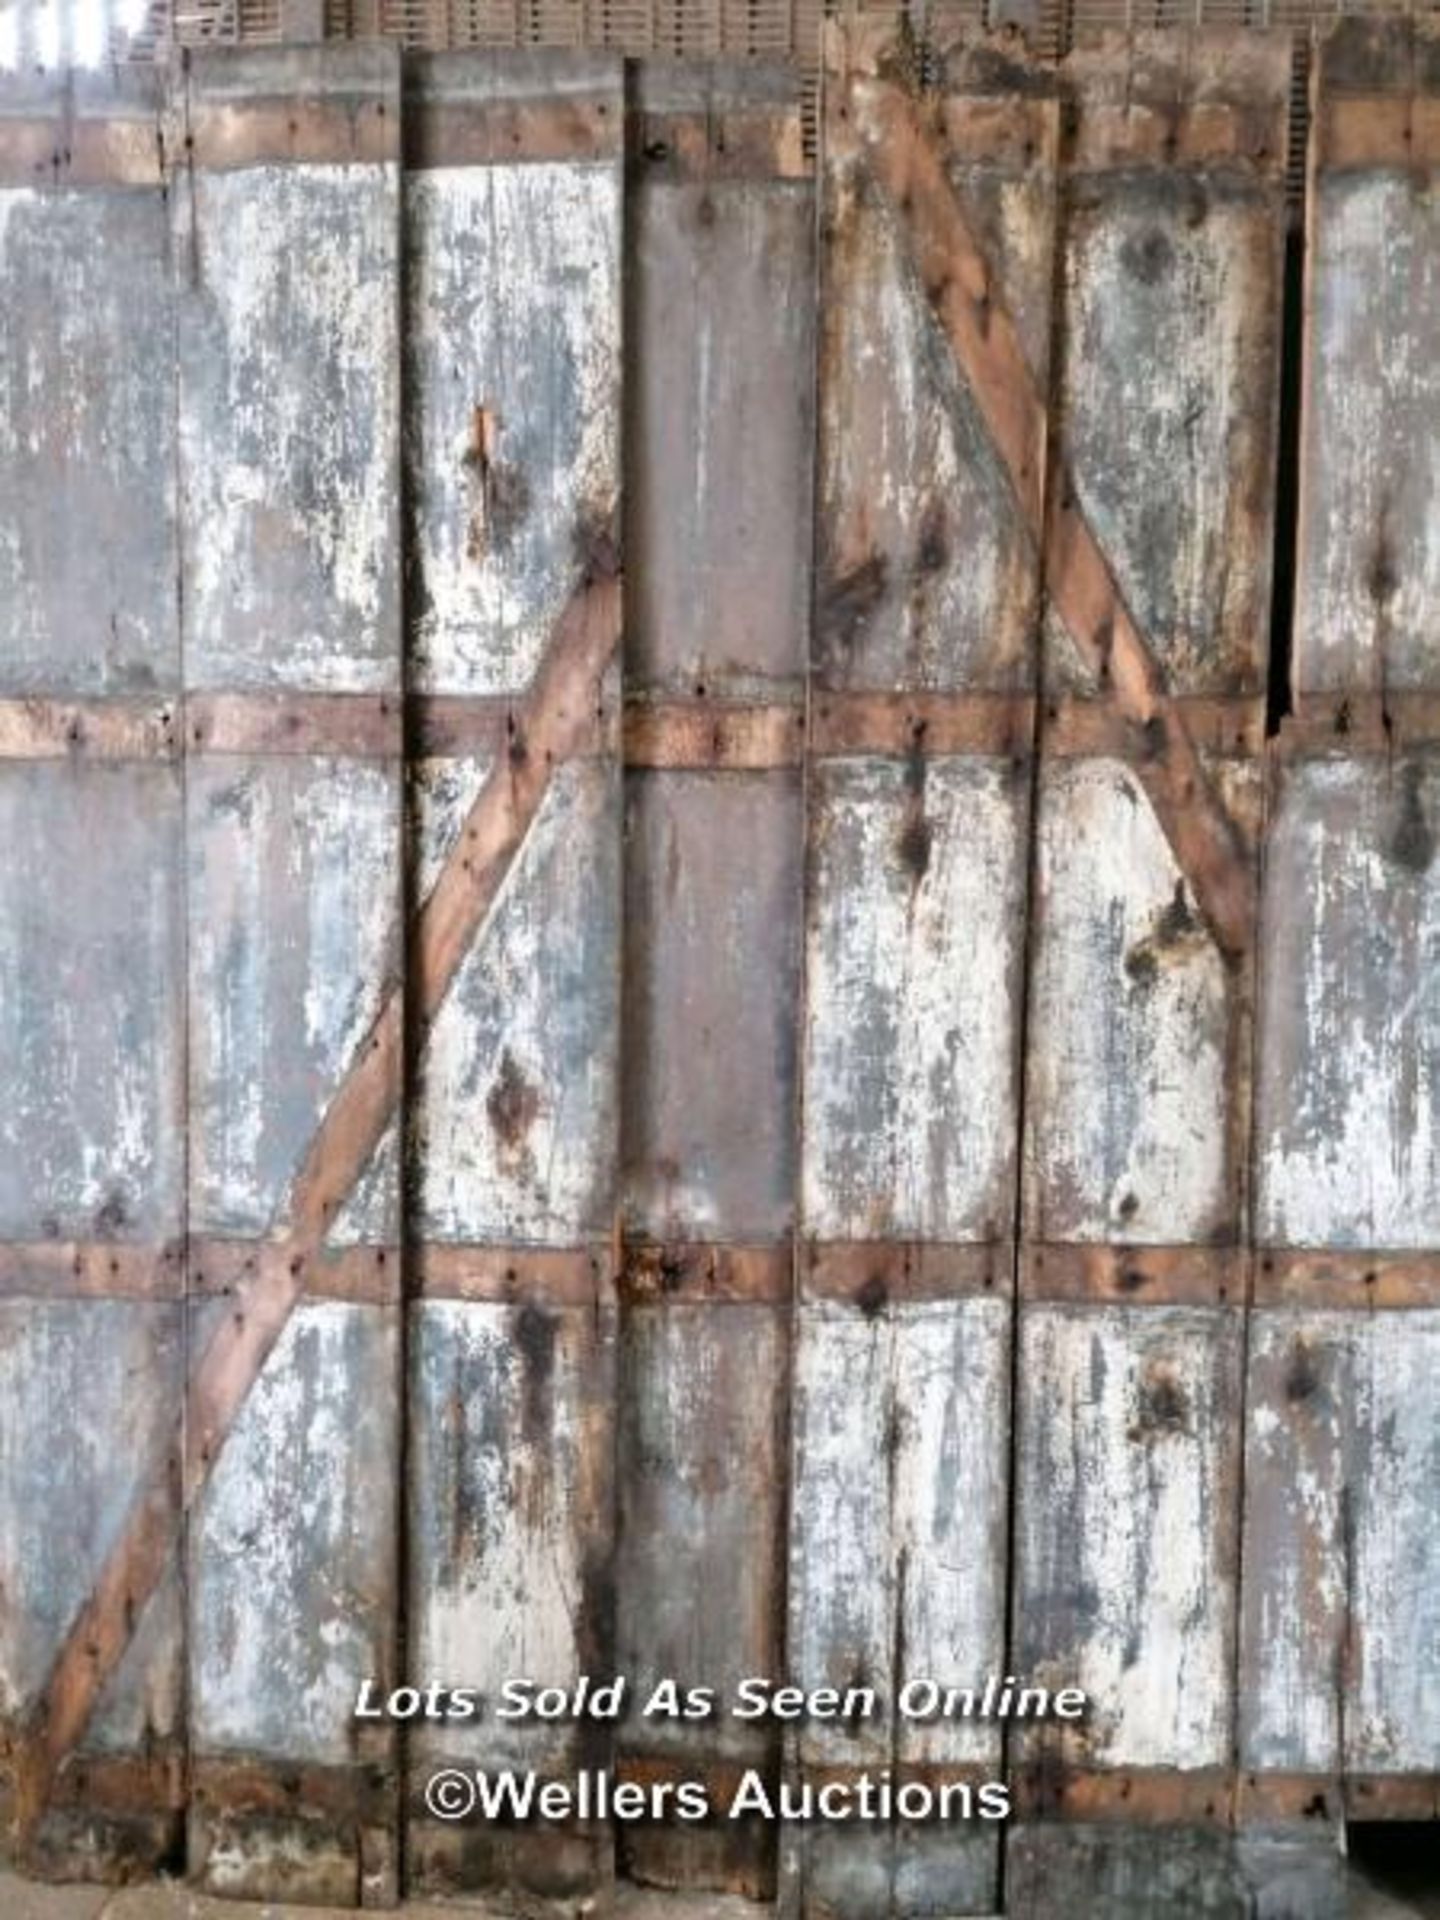 9 boards for use as decorative wall cladding. Original planks from barn doors. Pine. Paint surface - Image 2 of 4